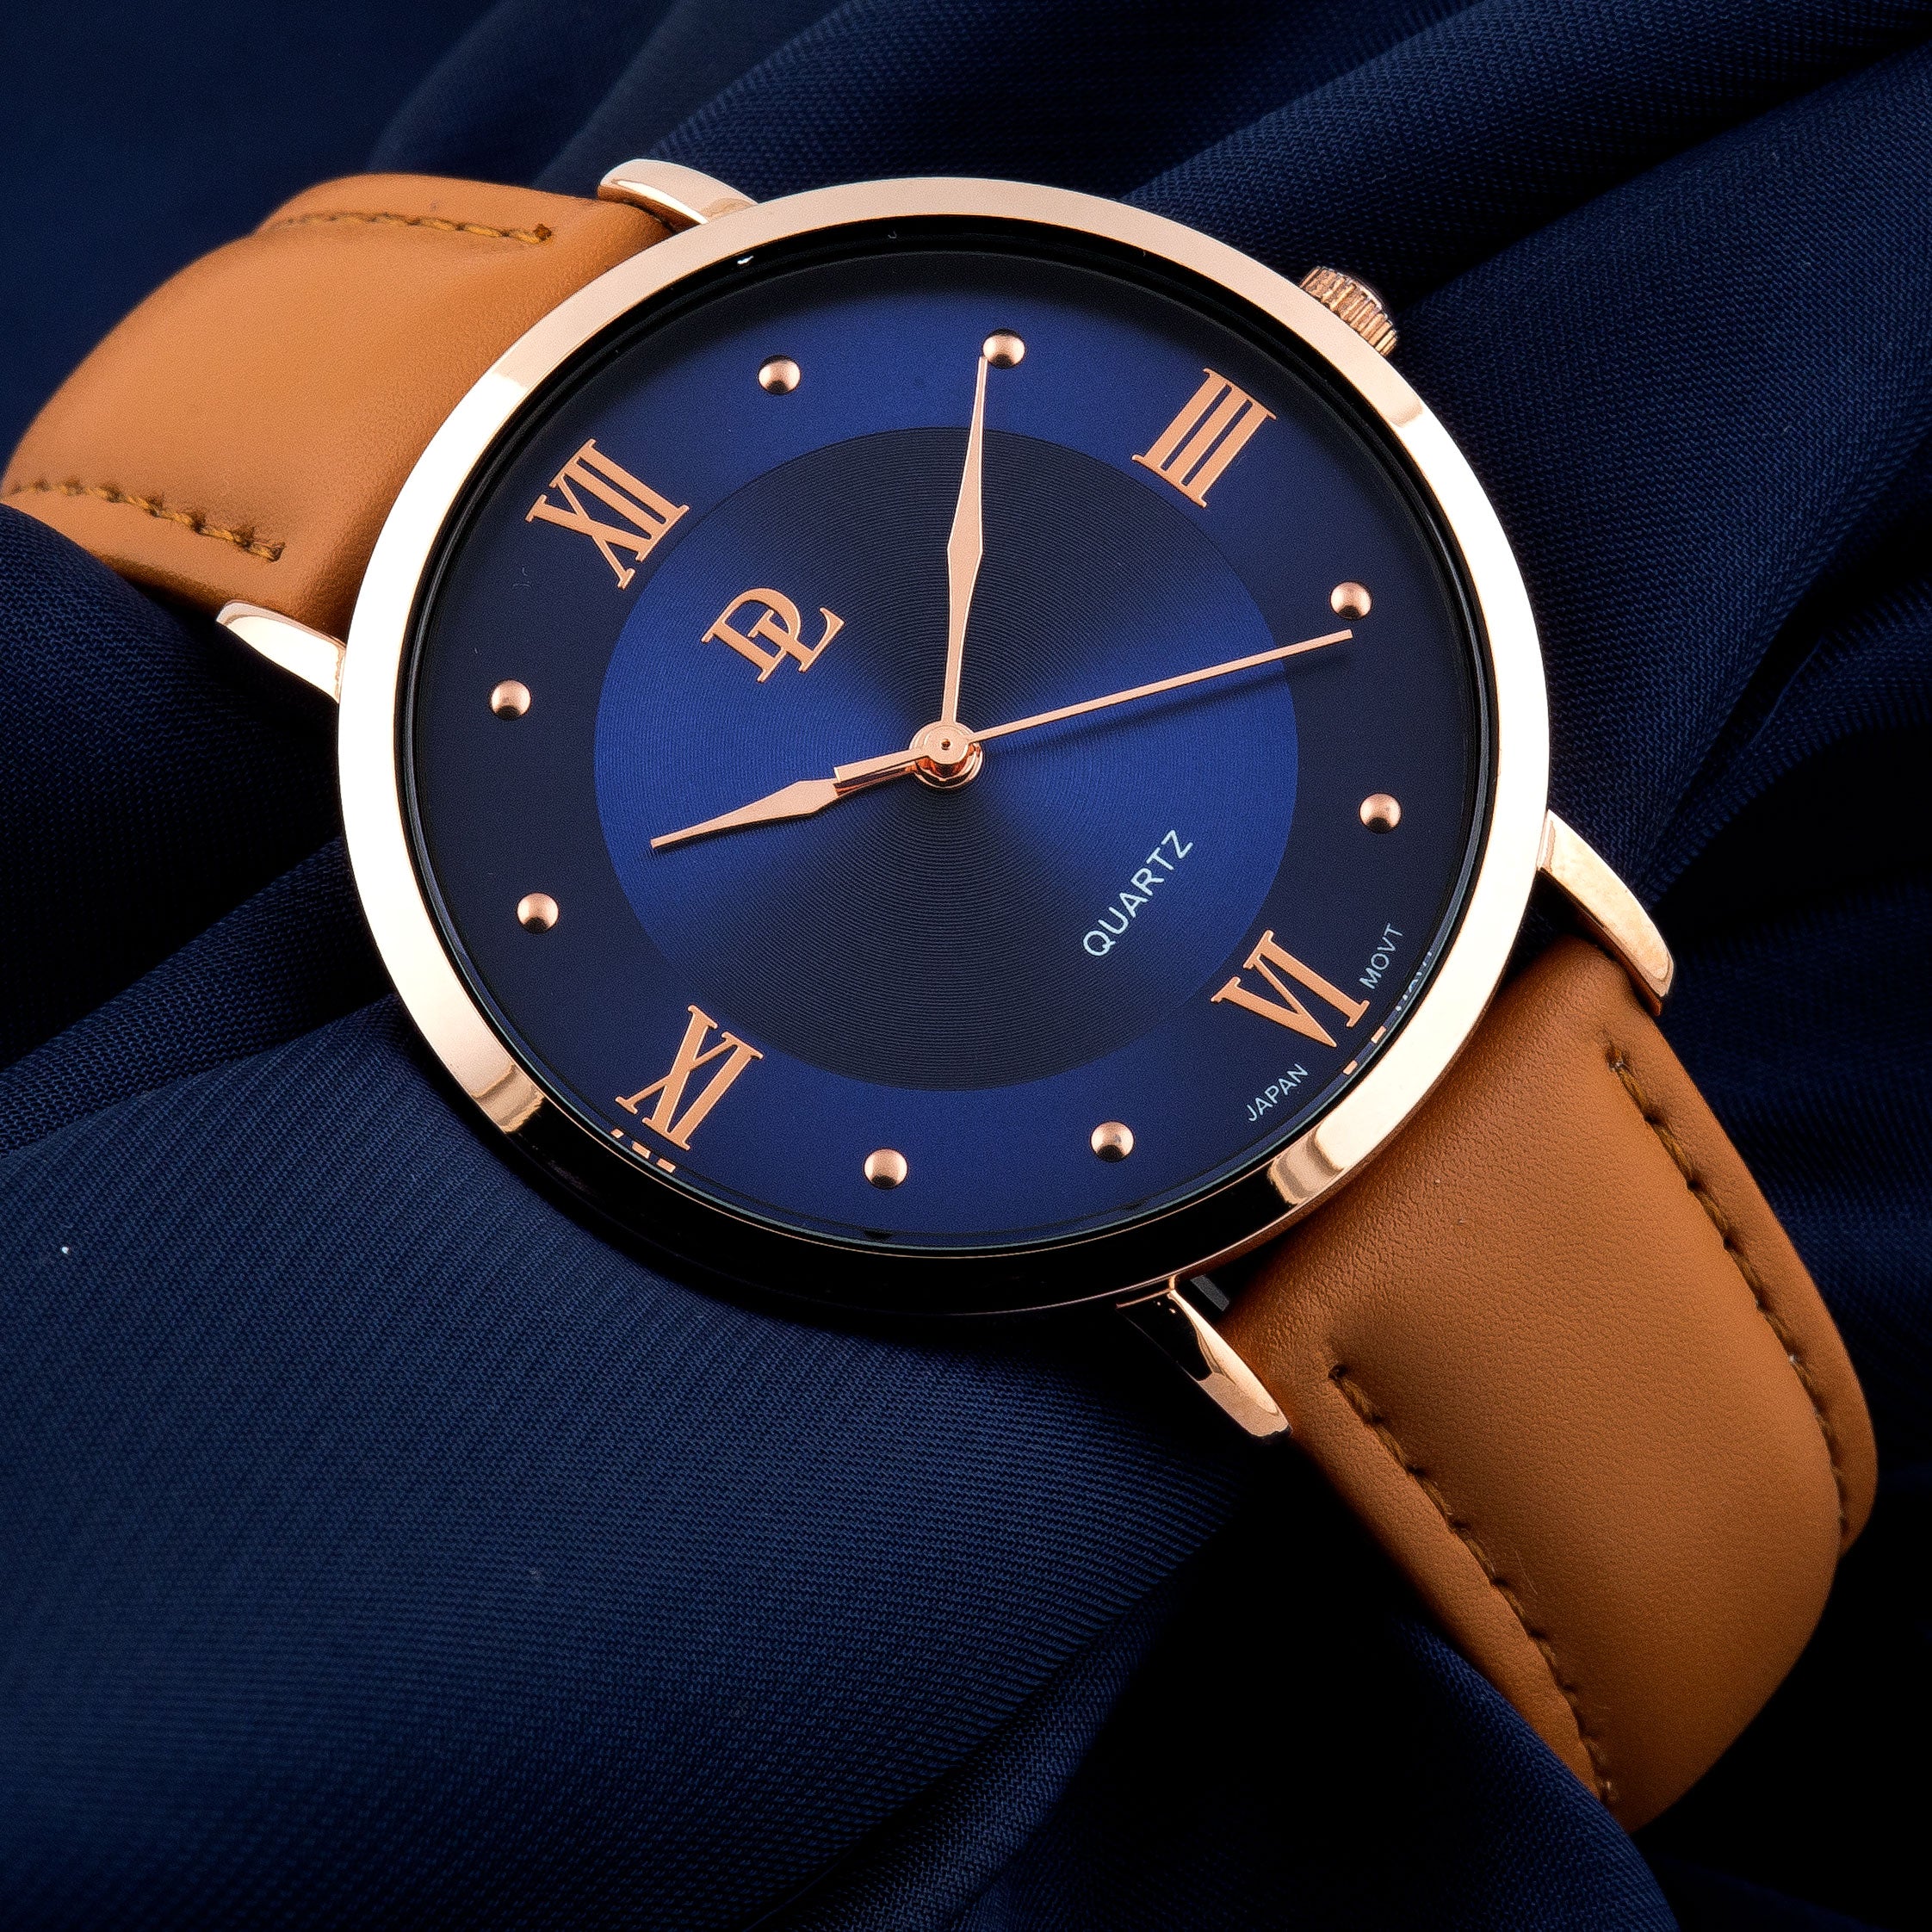 Deep Blue – Delawrence watches